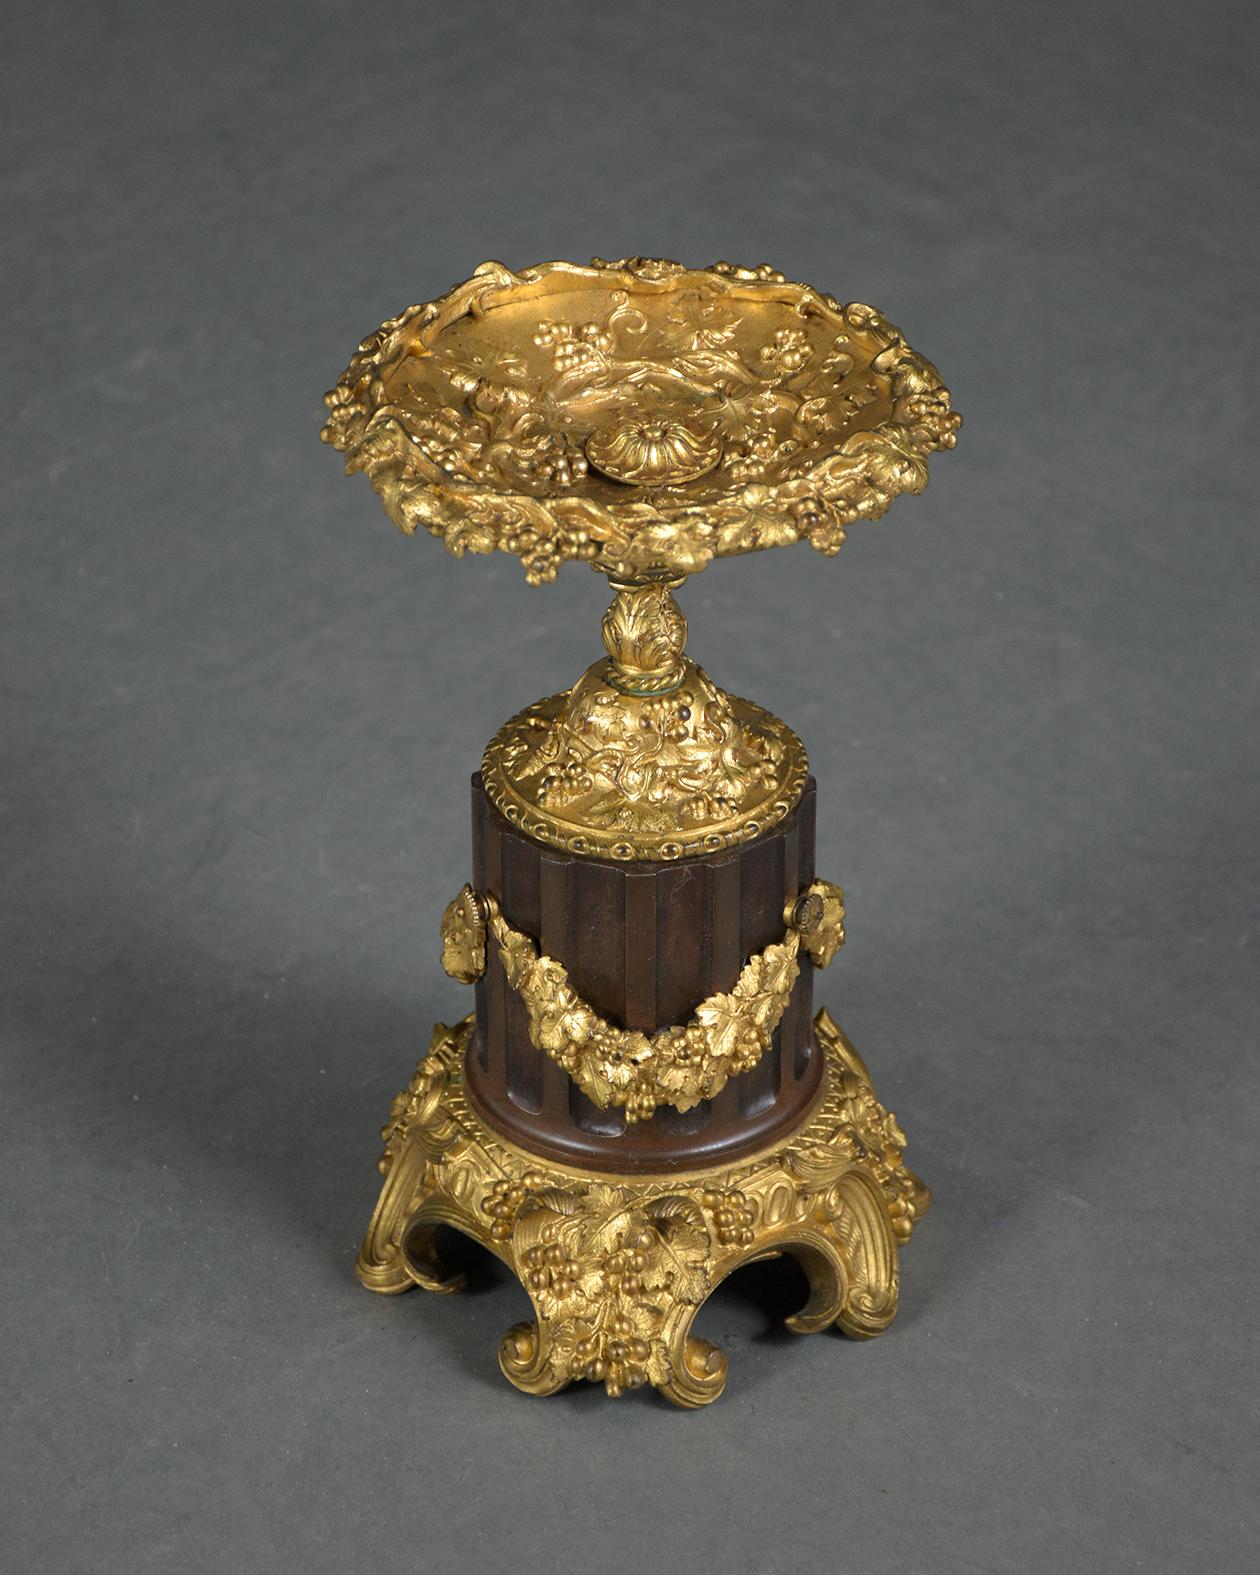 Elegant 19th-Century French Bronzed Urns with Gold Ormolu Details In Good Condition For Sale In Los Angeles, CA